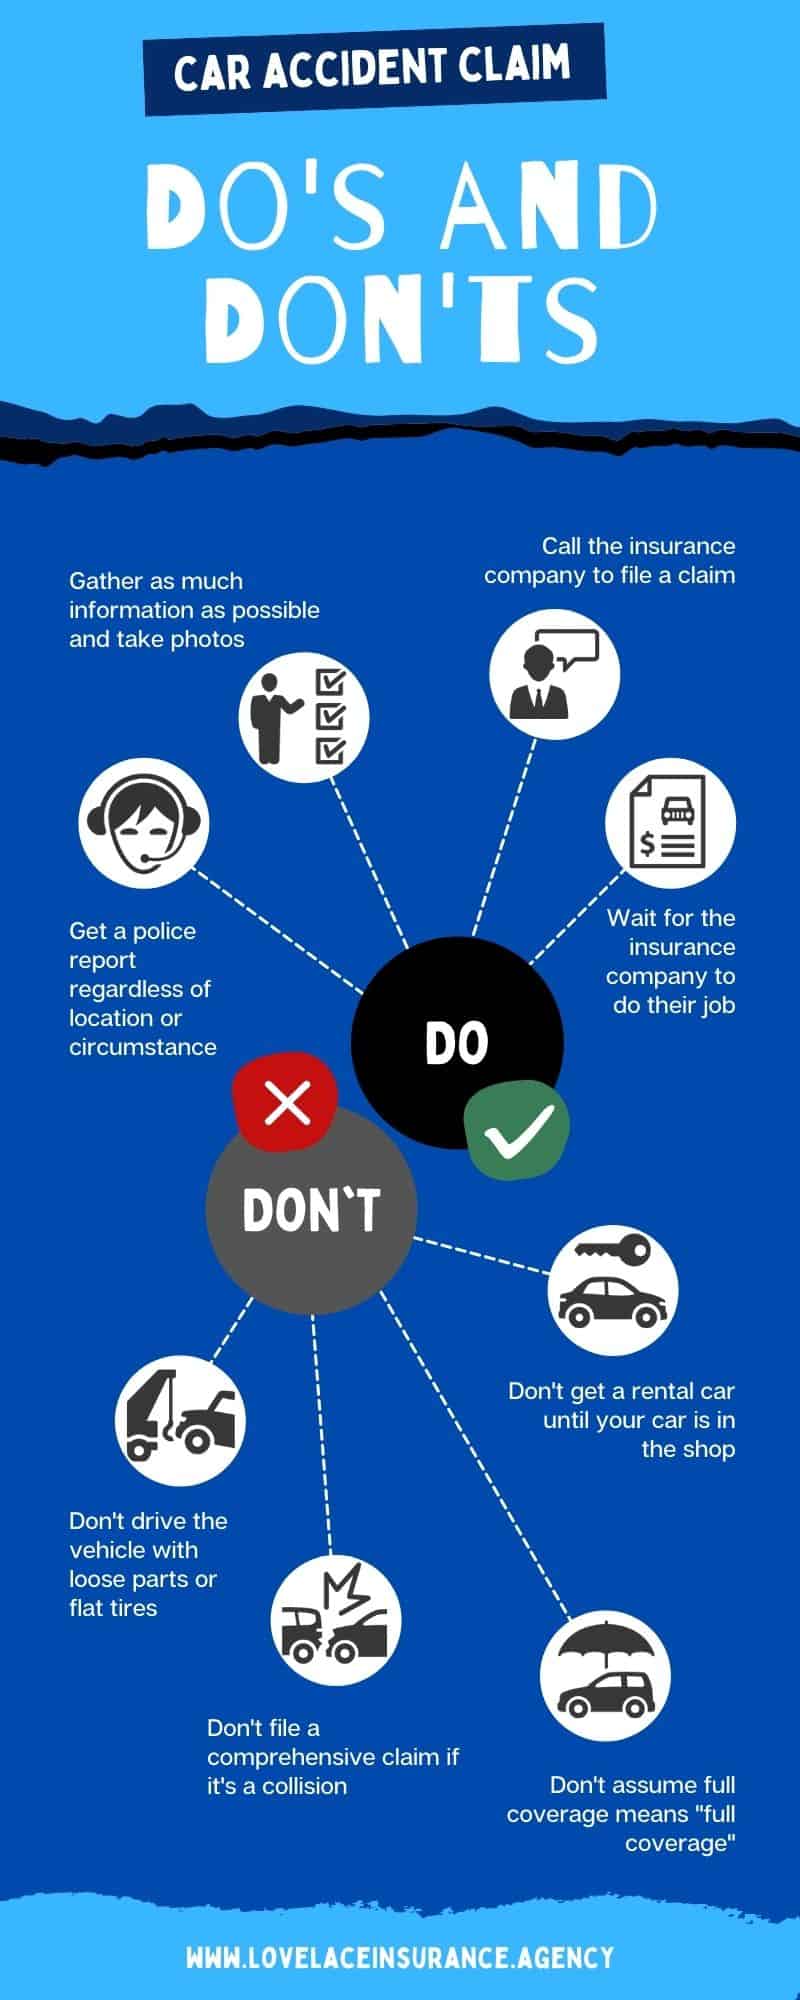 Car Accident Claim Dos and Don'ts